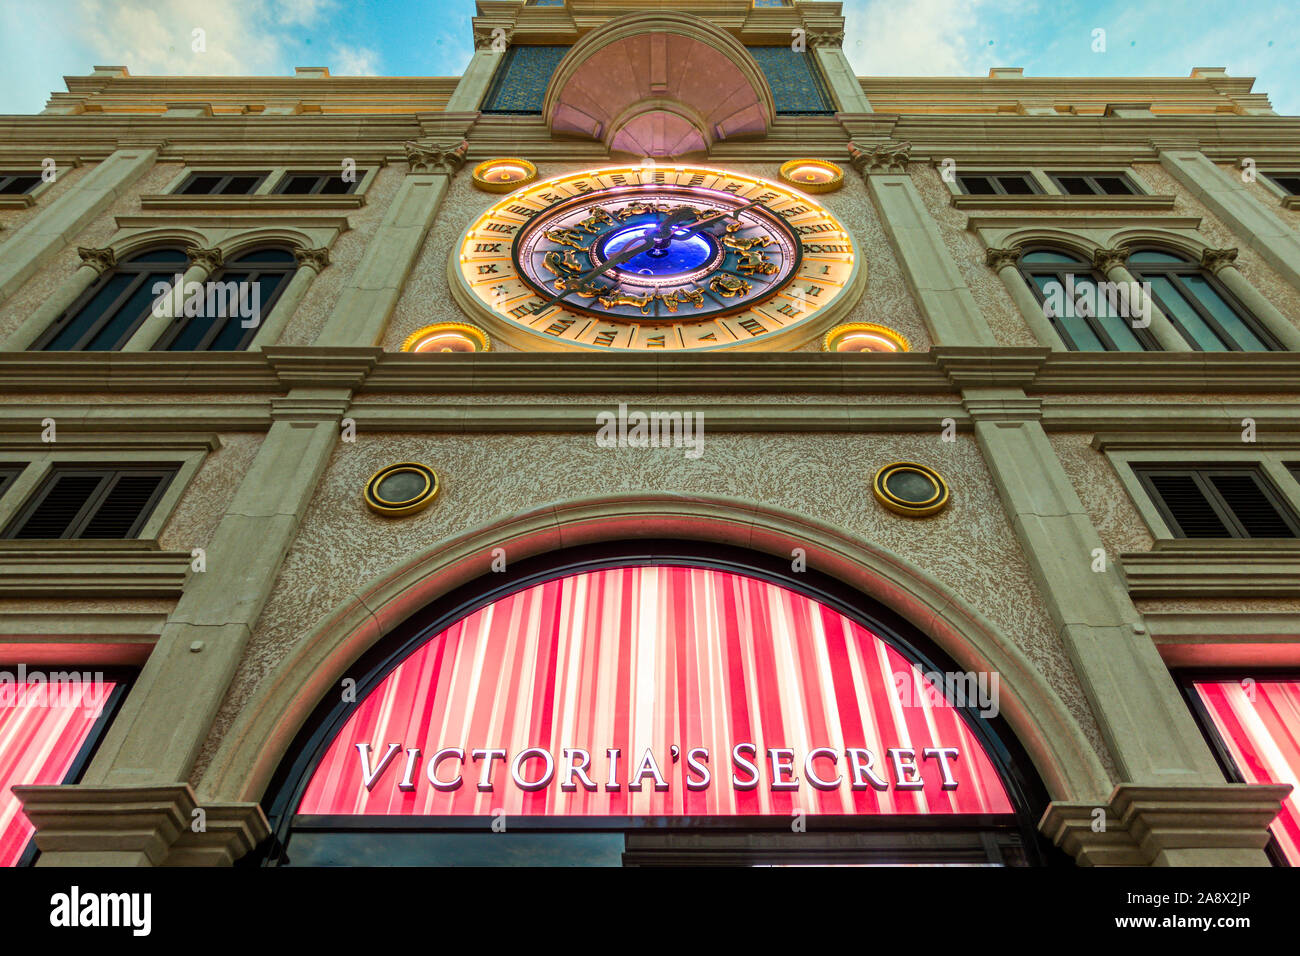 October 31, 2019: MACAU, CHINA - Victoria Secret Store under European Clock at the Venetian Hotel and Casino, Largest Supercomplex in the World Stock Photo